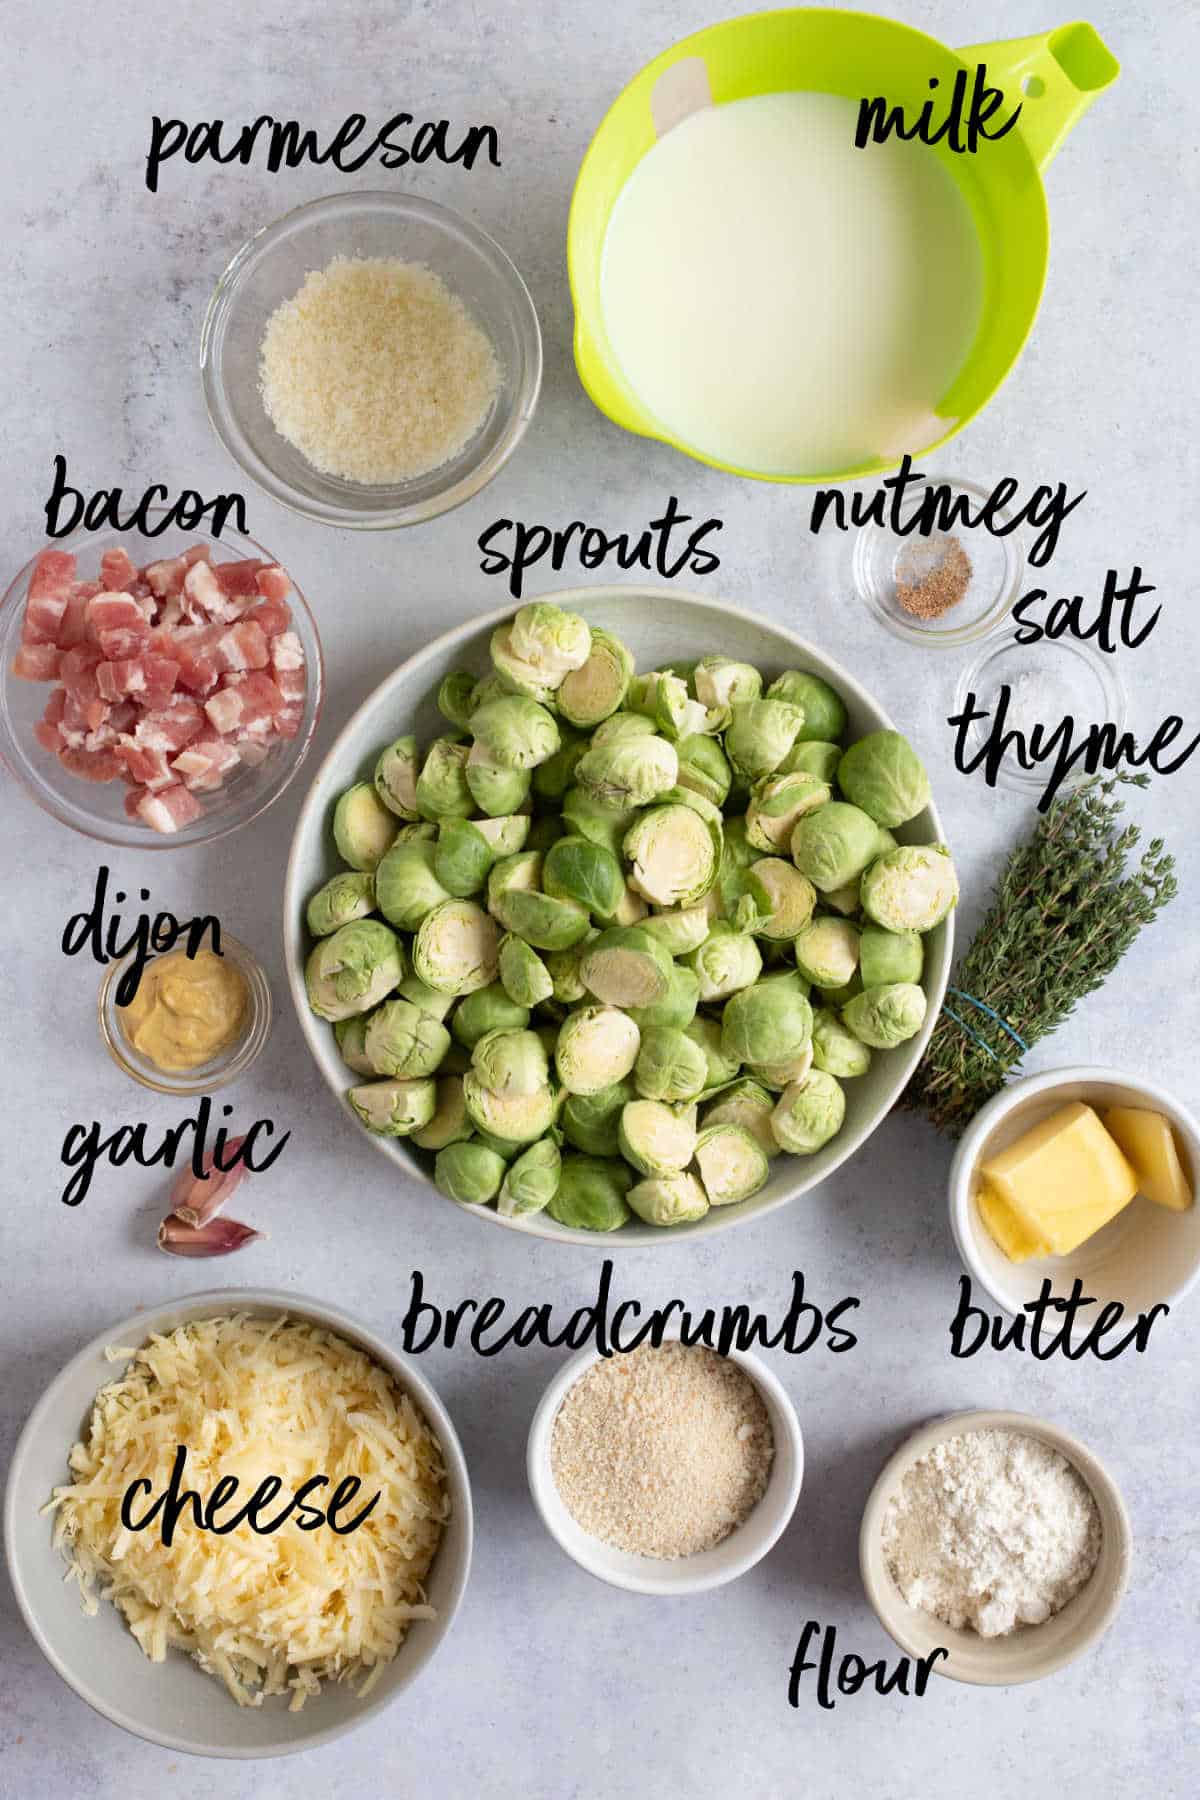 Ingredients for Brussels sprout gratin.